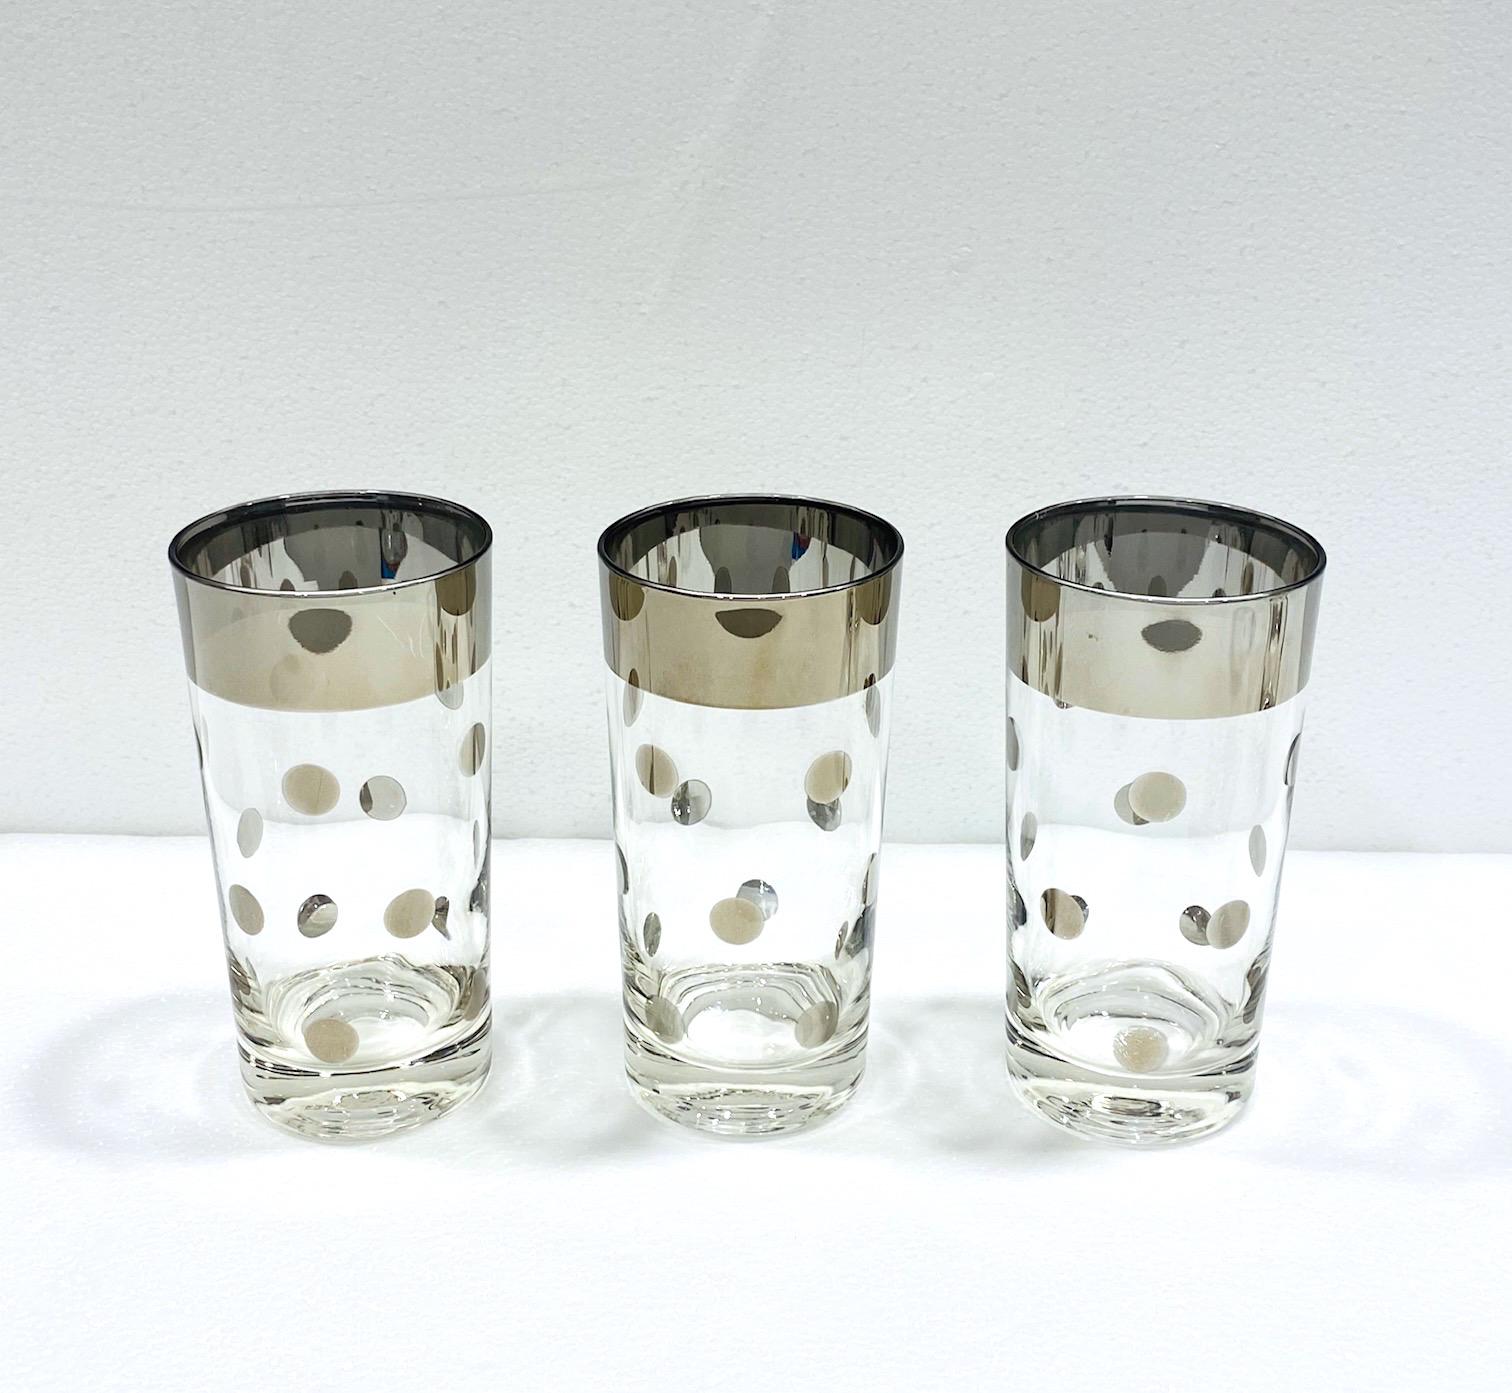 American Set of Six Polka Dot Barware Glasses with Silver Overlay by Dorothy Thorpe, 1960